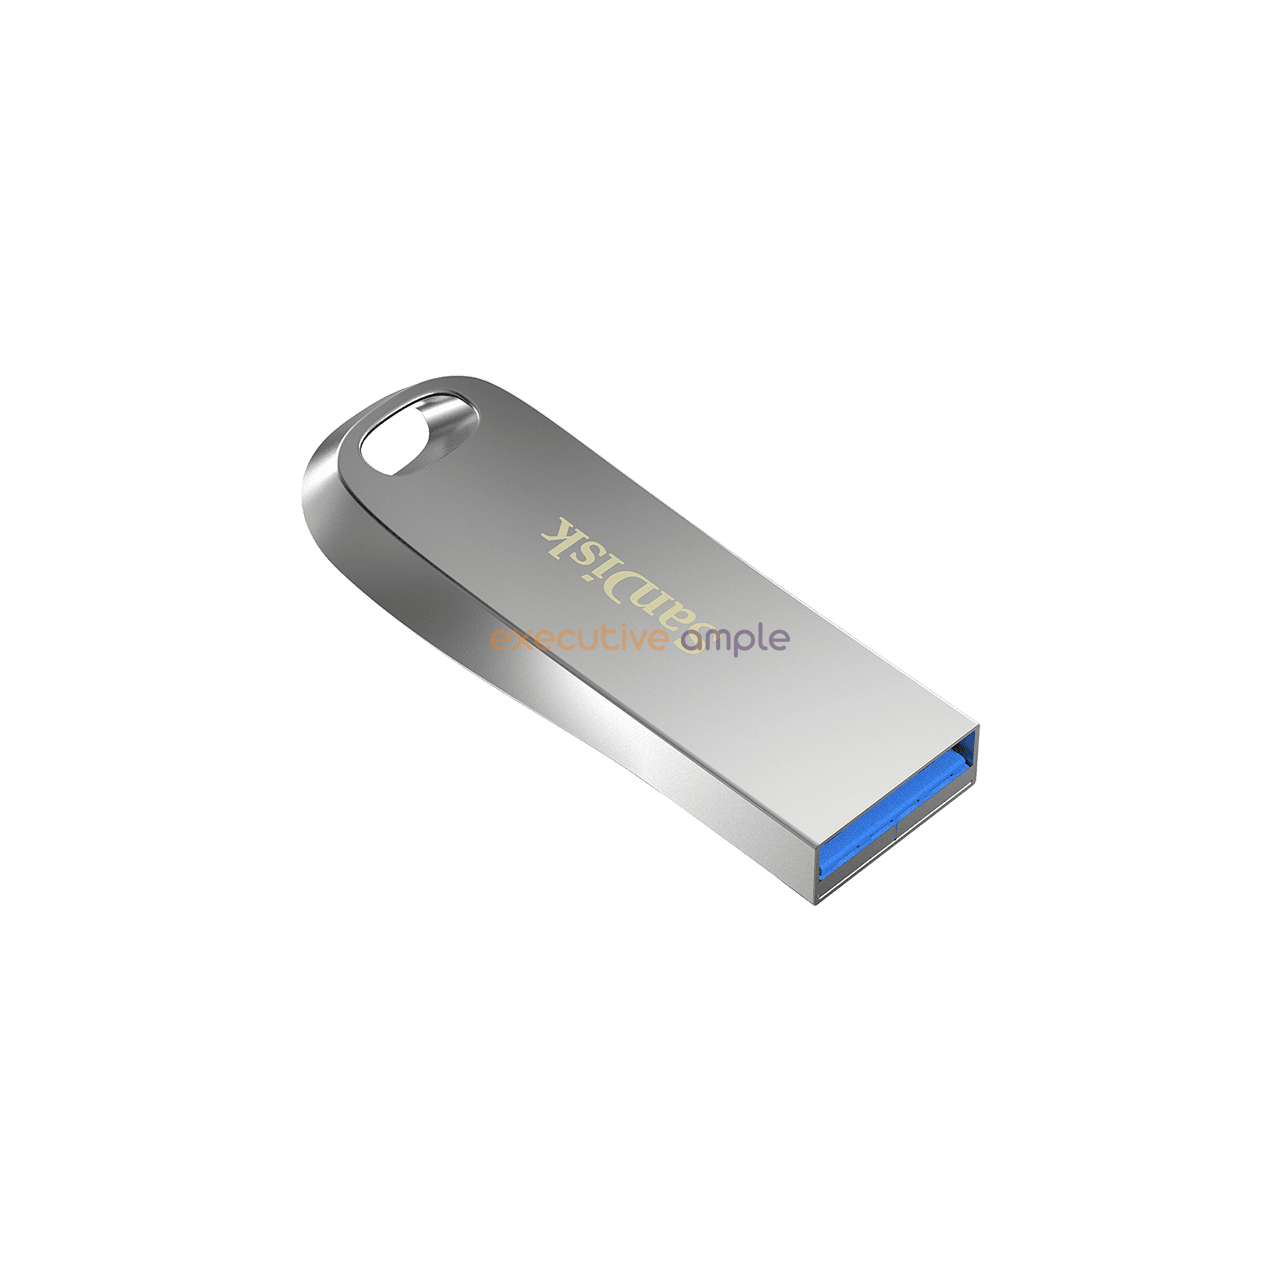 SanDisk Ultra Luxe USB 3.1 Flash Drive